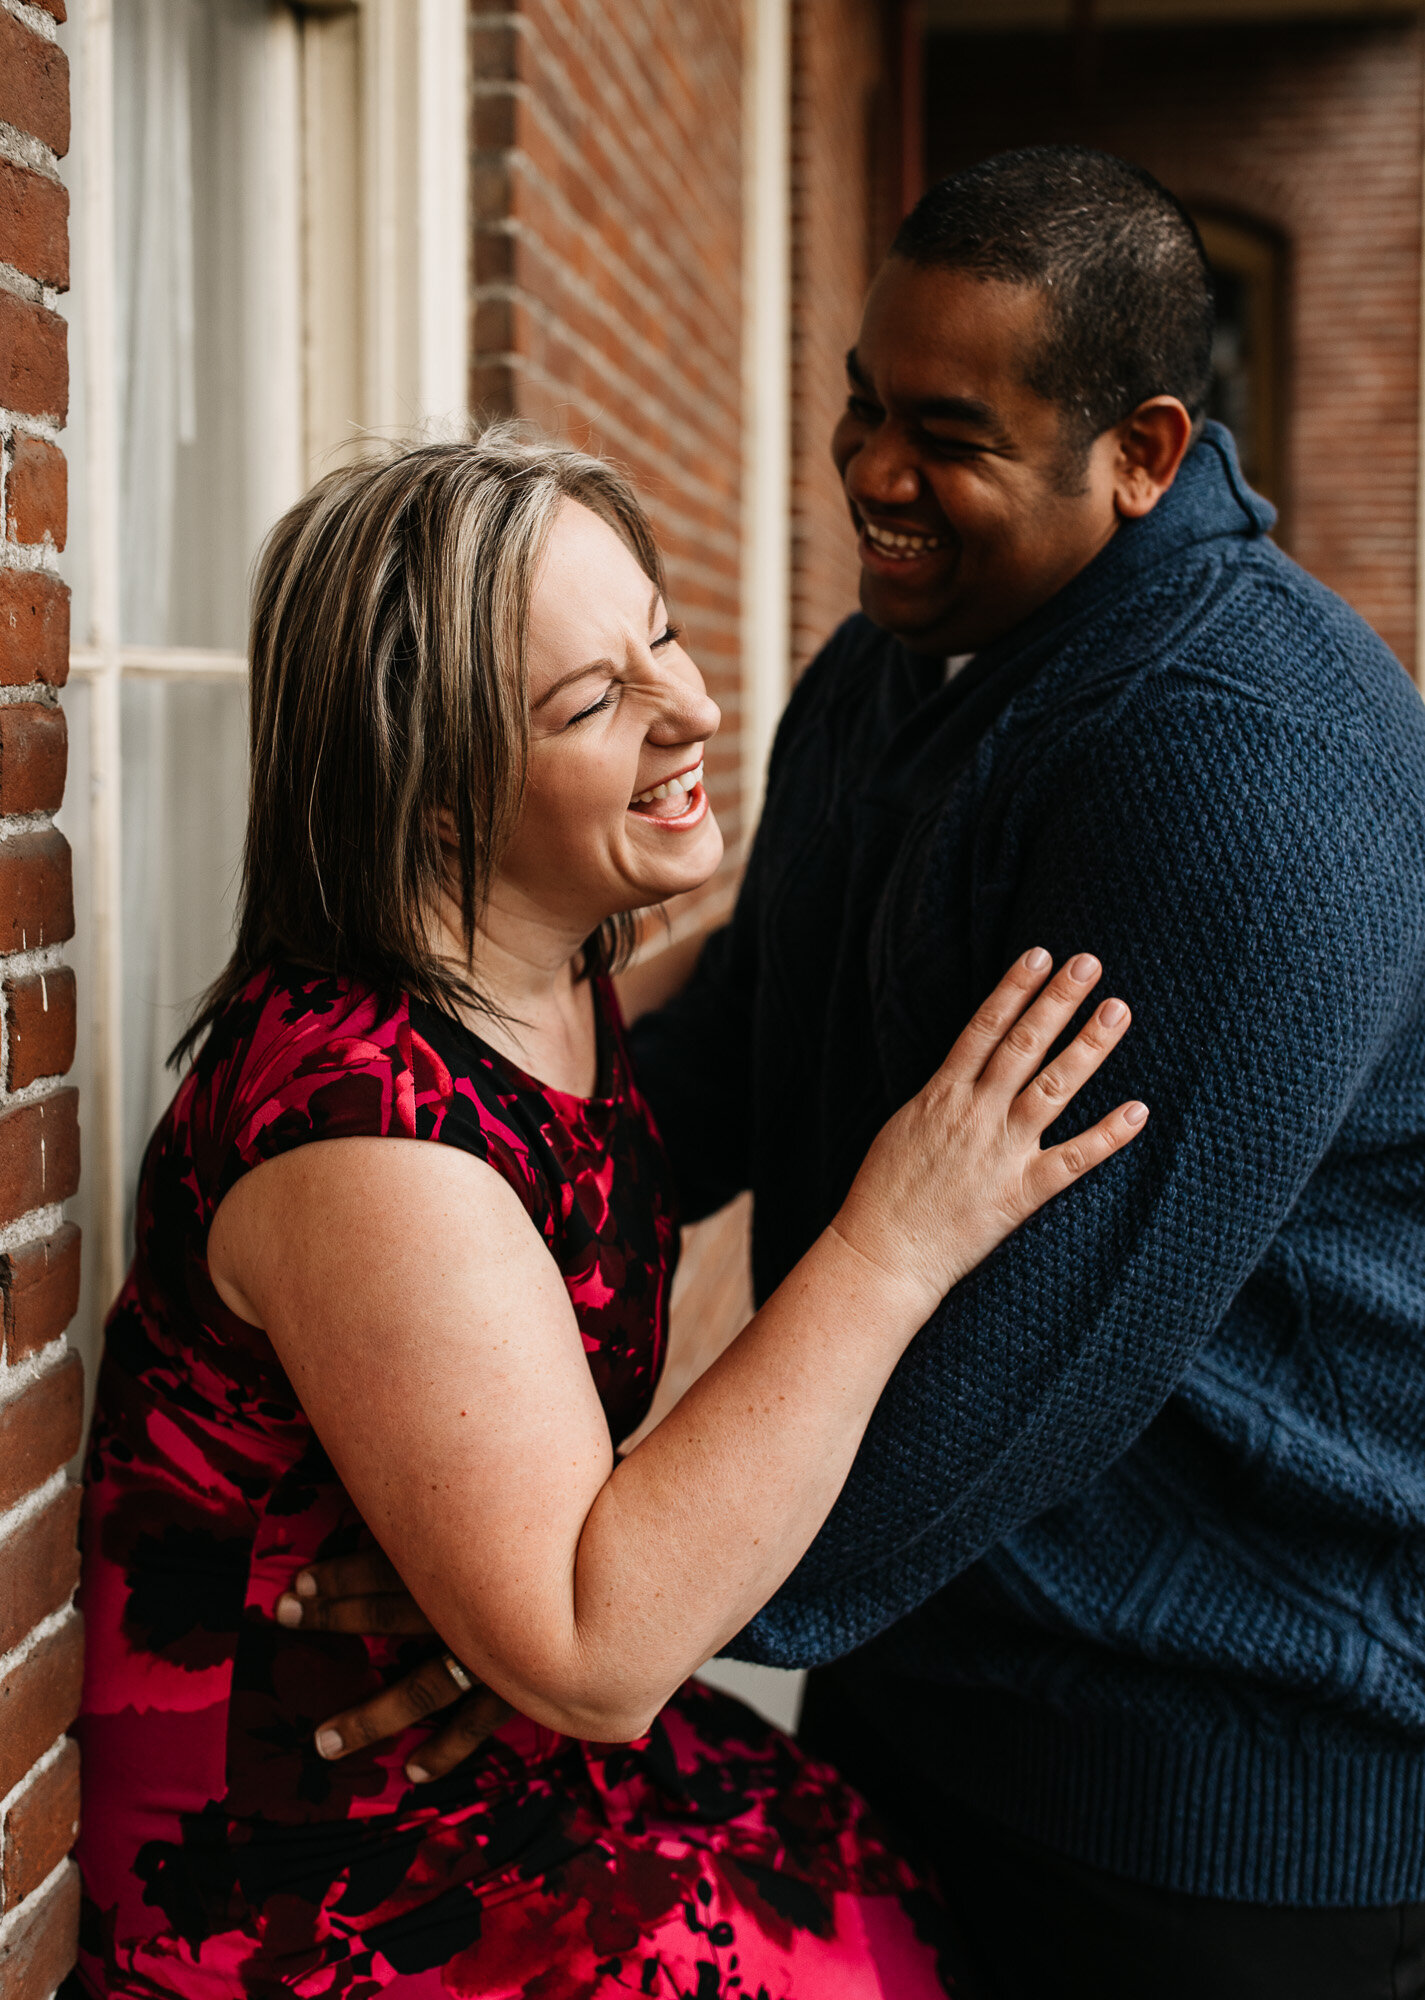 The best time of year for outdoor portrait photography | husband and wife laugh against a brick wall at a historic church near Portland, Oregon.